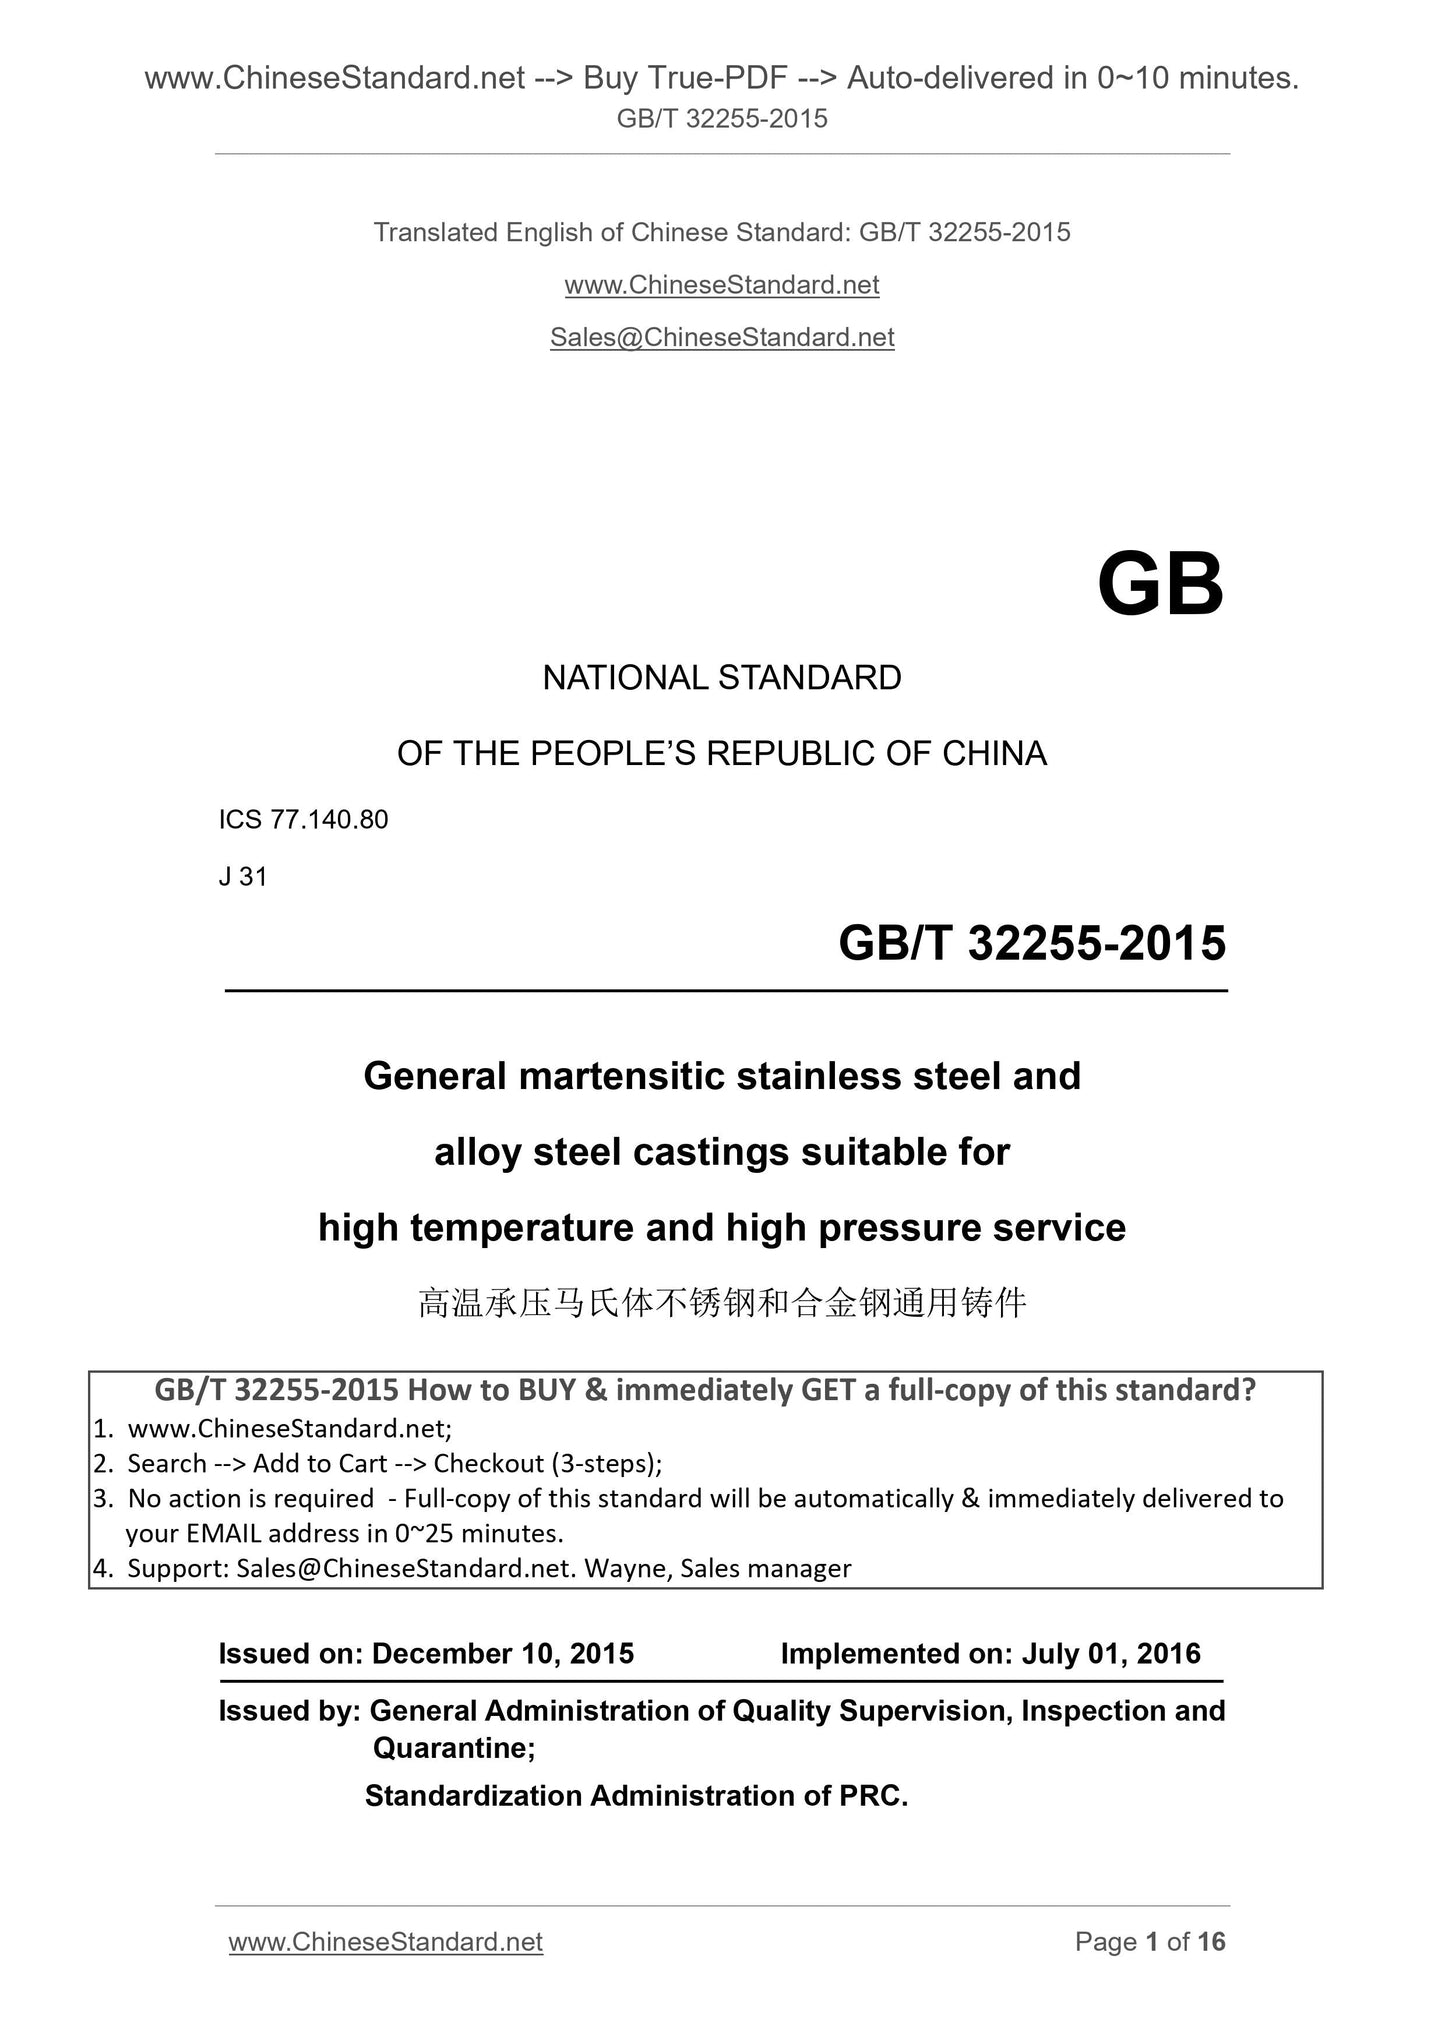 GB/T 32255-2015 Page 1